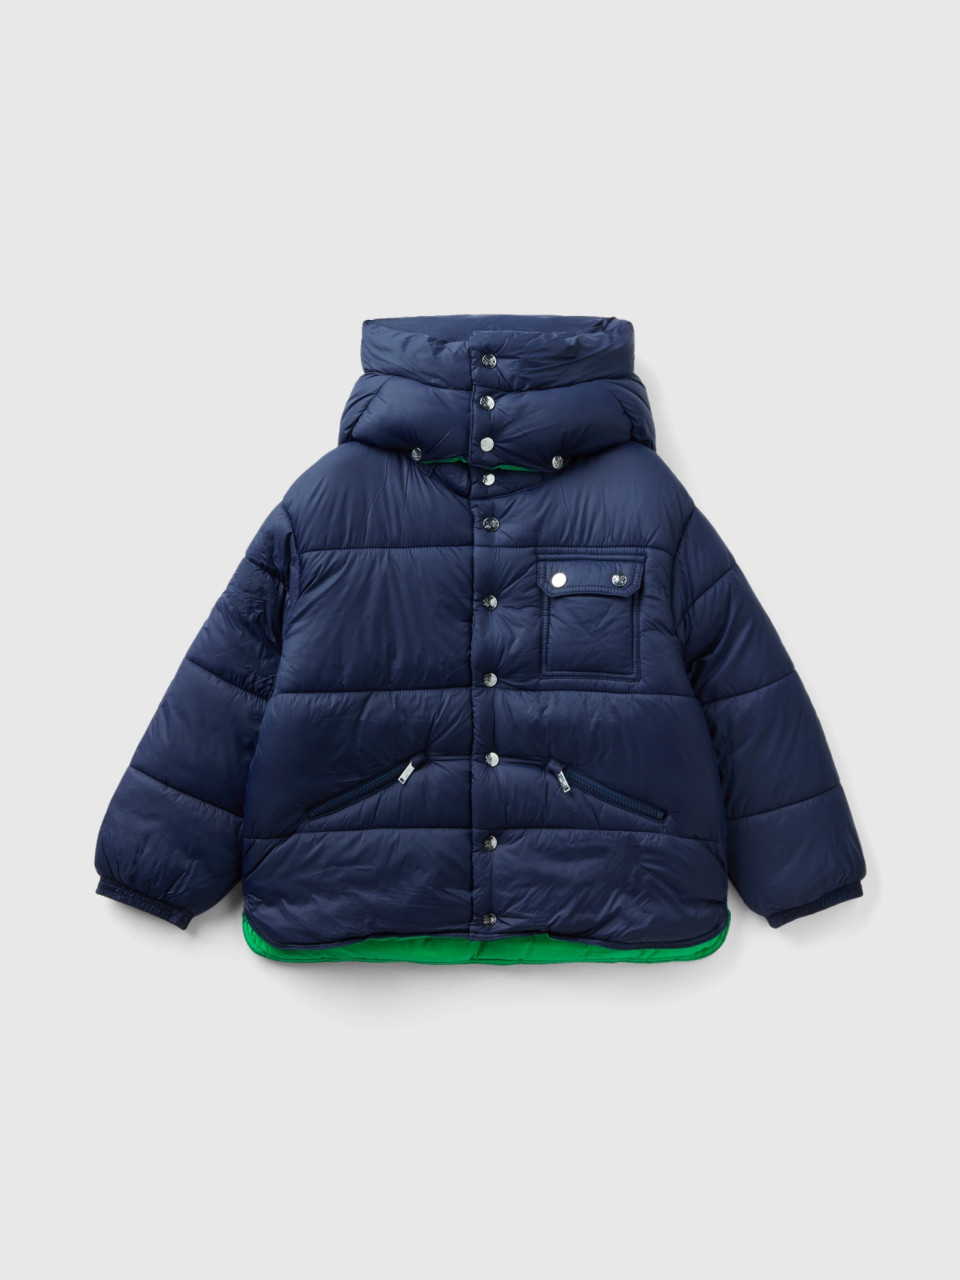 Benetton, Padded Jacket With Removable Hood, Dark Blue, Kids